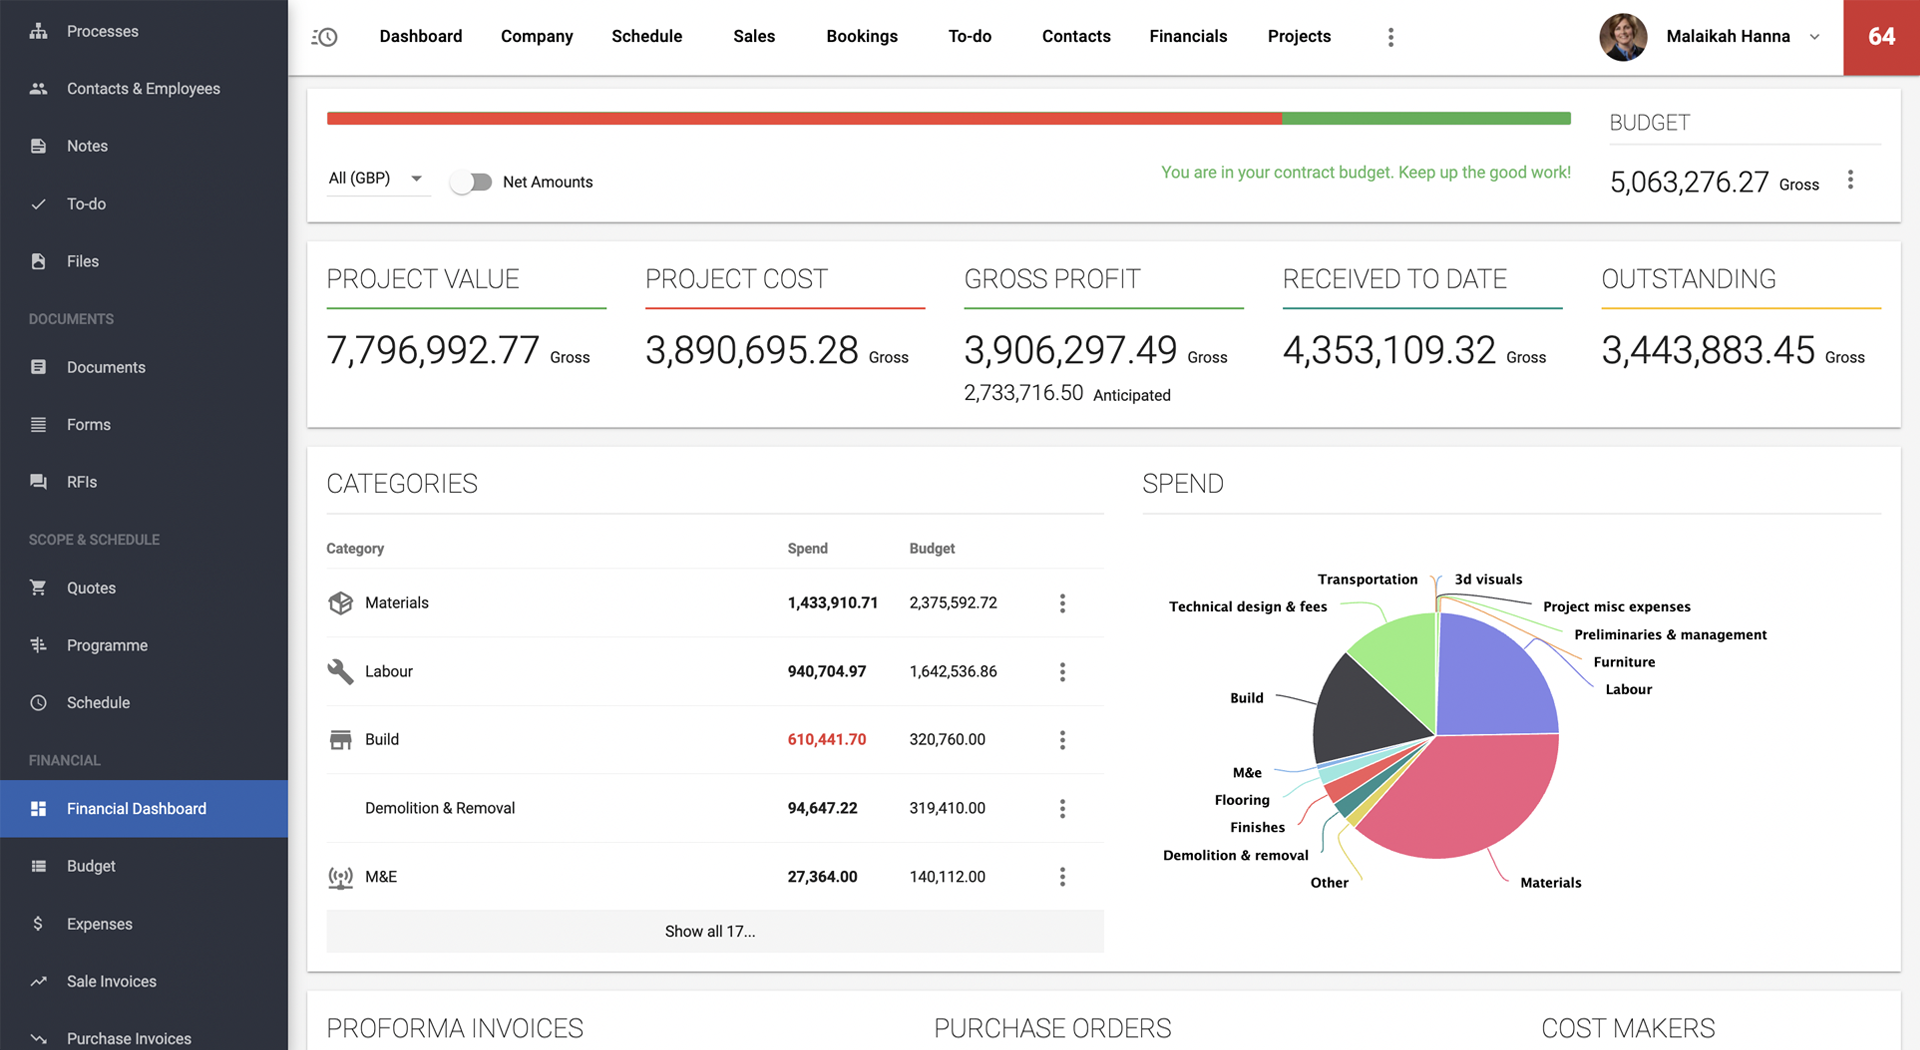 View on construction budget details in the financial dashboard in Archdesk construction software